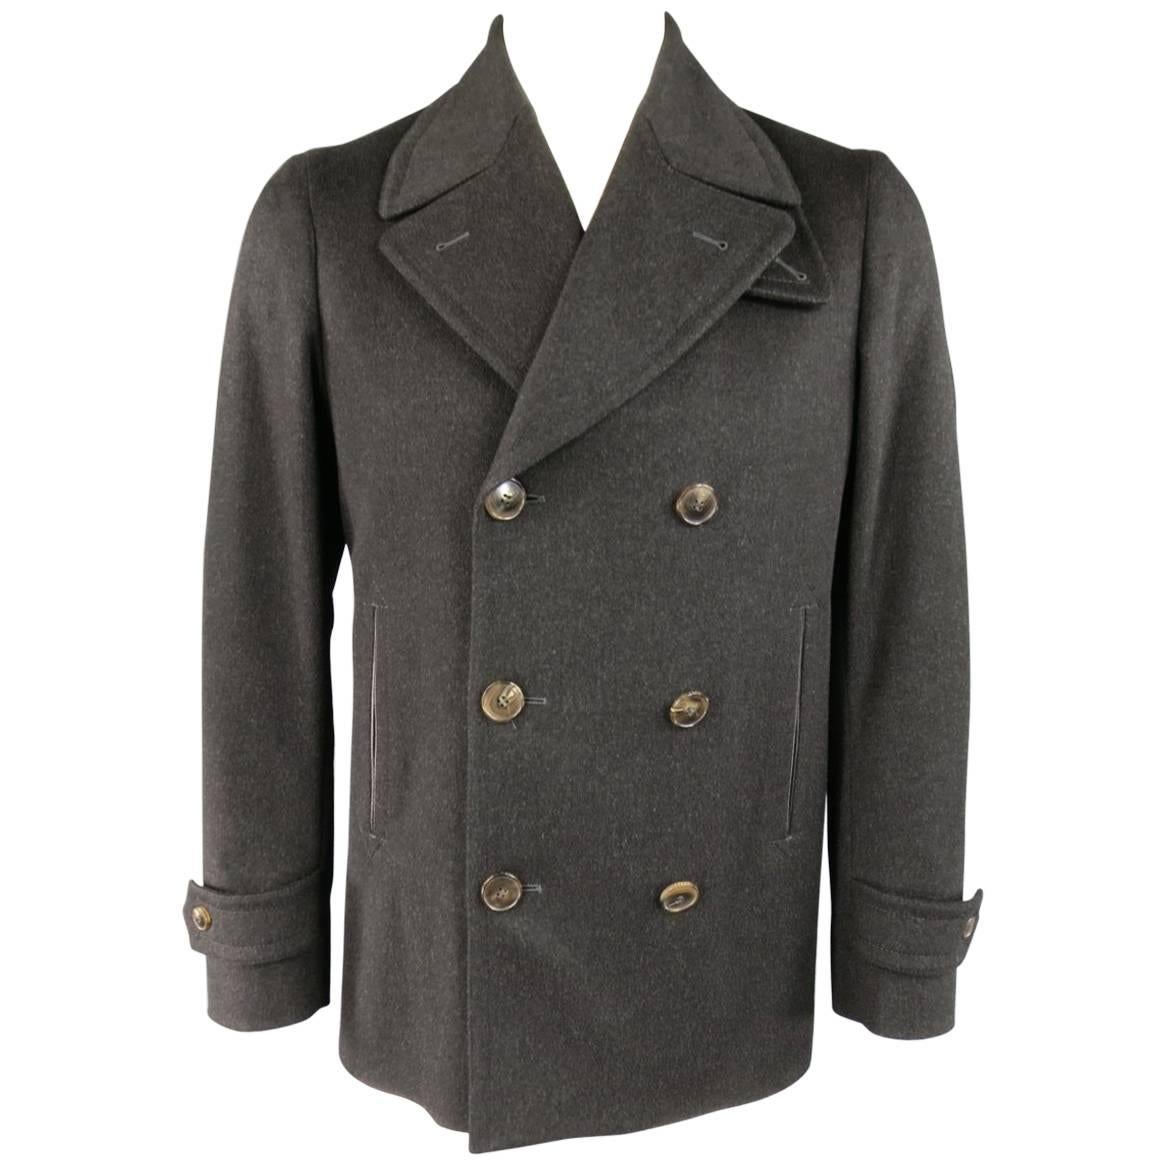 Men's GUCCI Size 40 Charcoal Soft Brushed Wool Peacoat